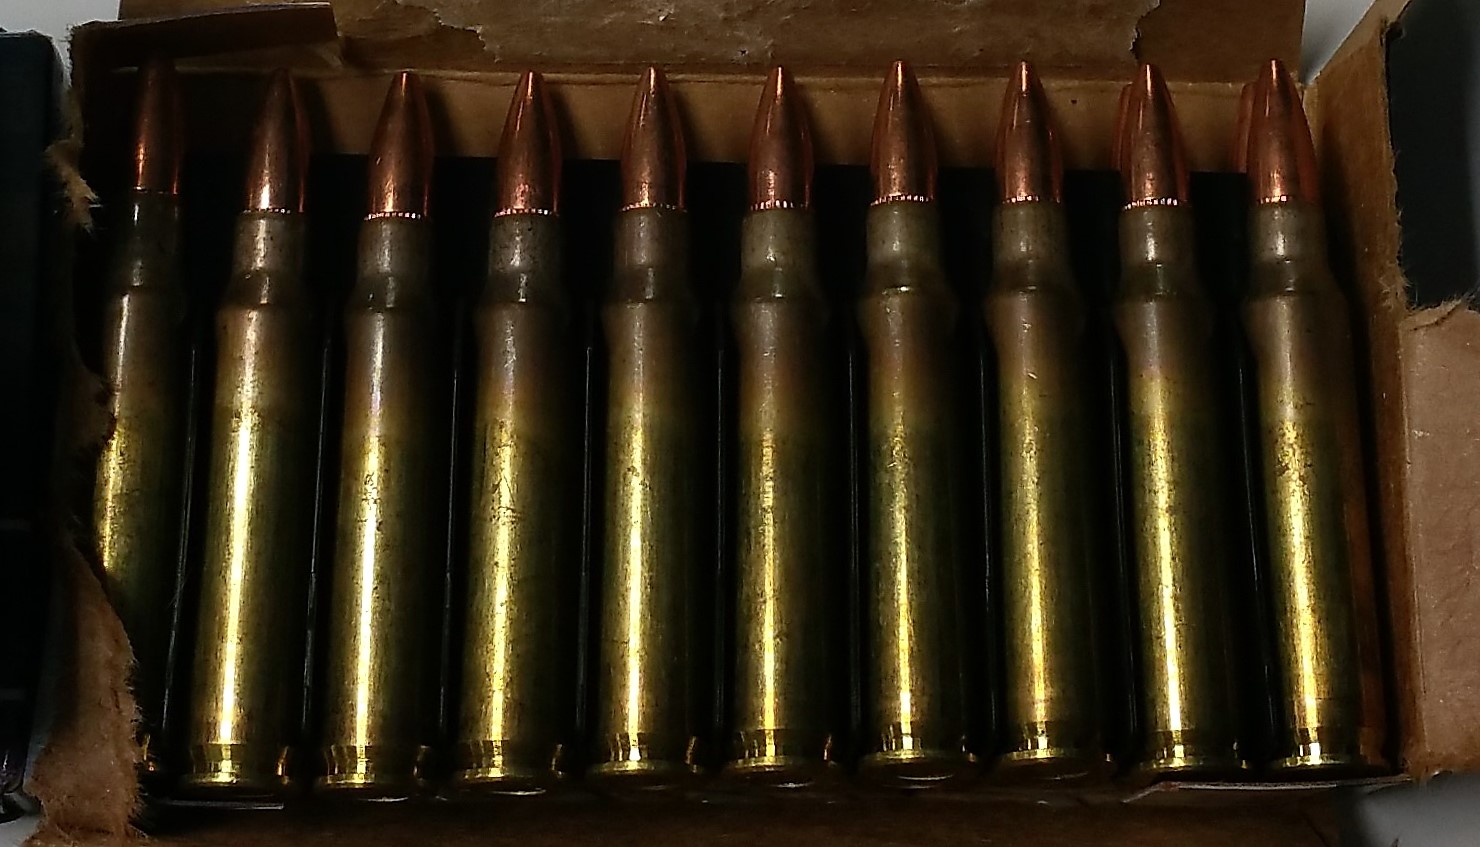 The ammunition pictured here was packed in a carry-on bag at the Chicago O’Hare International Airport (ORD). 